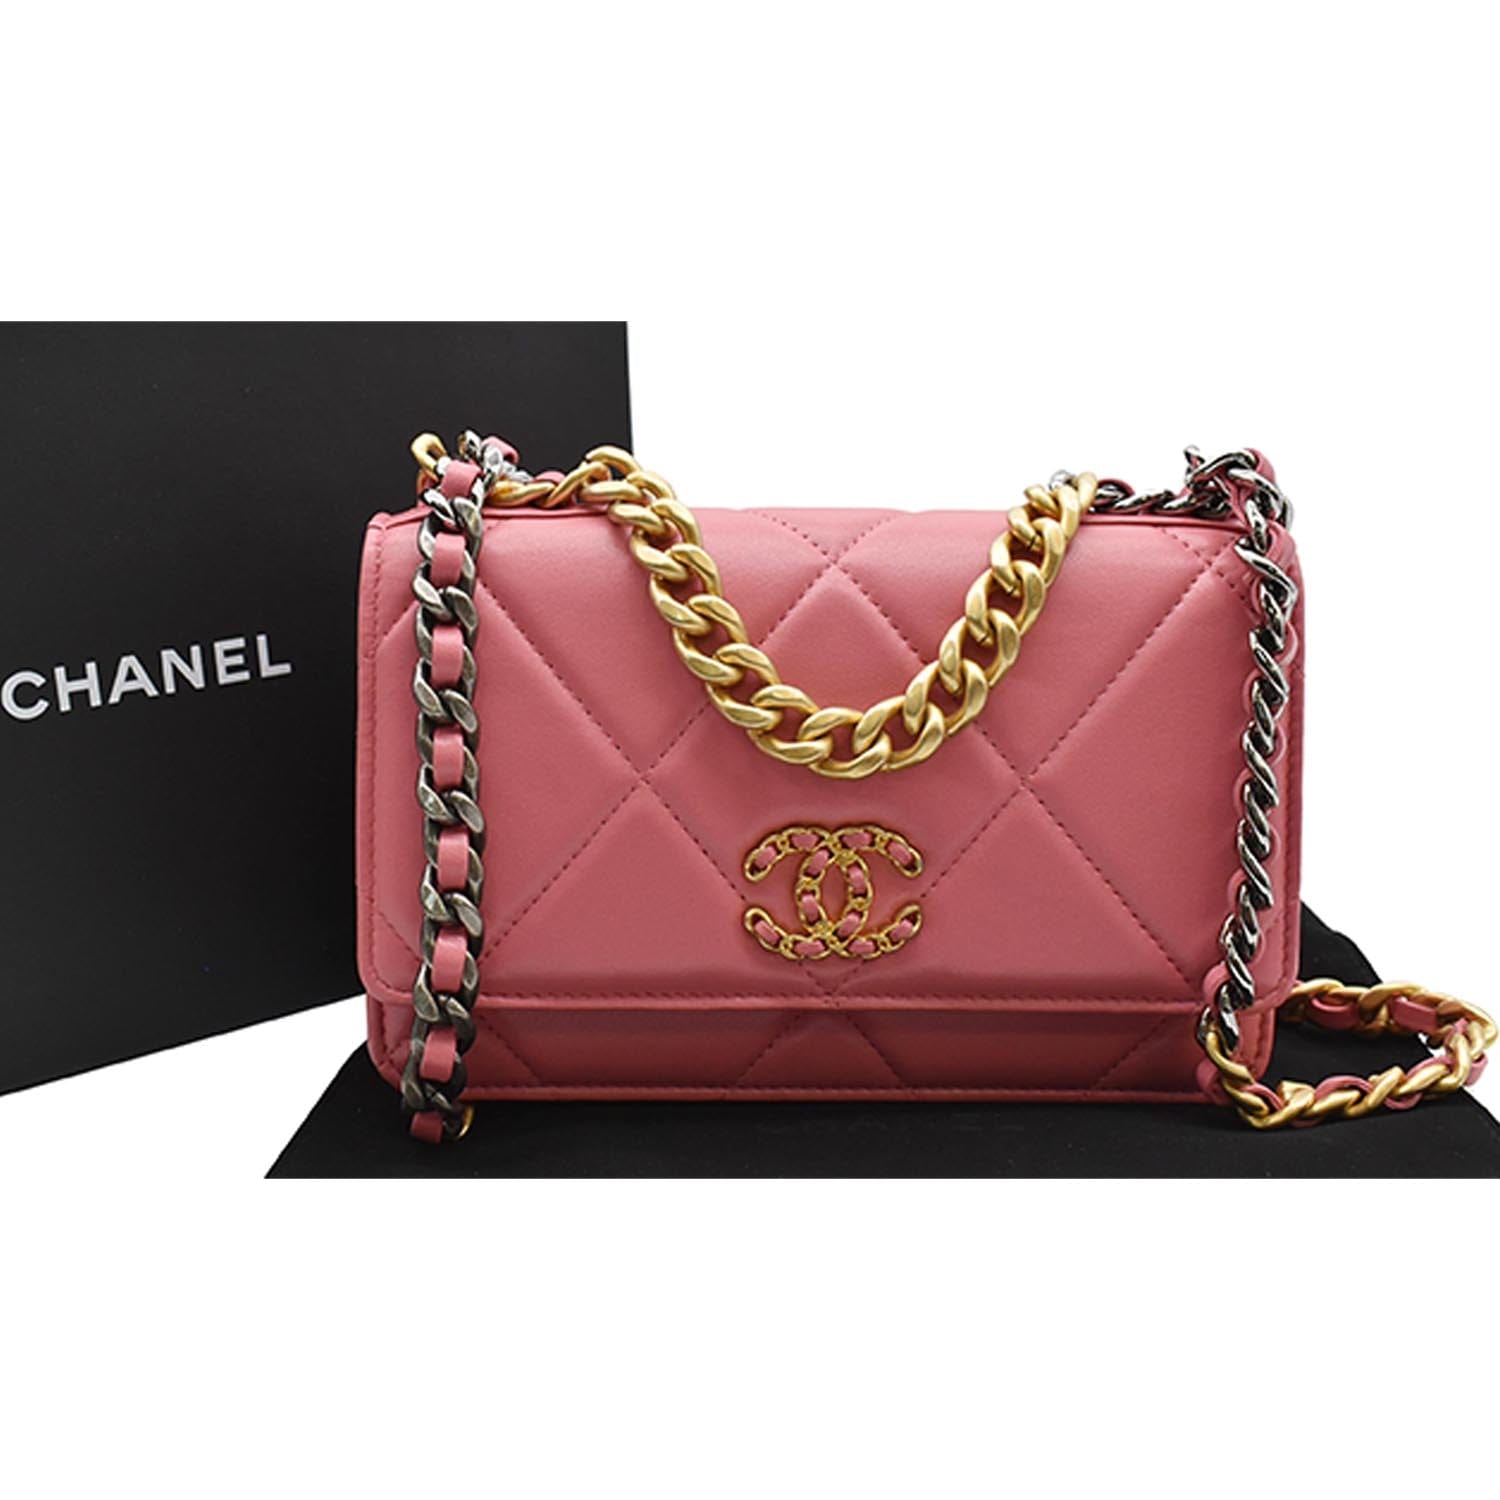 Chanel 19 wallet on chain